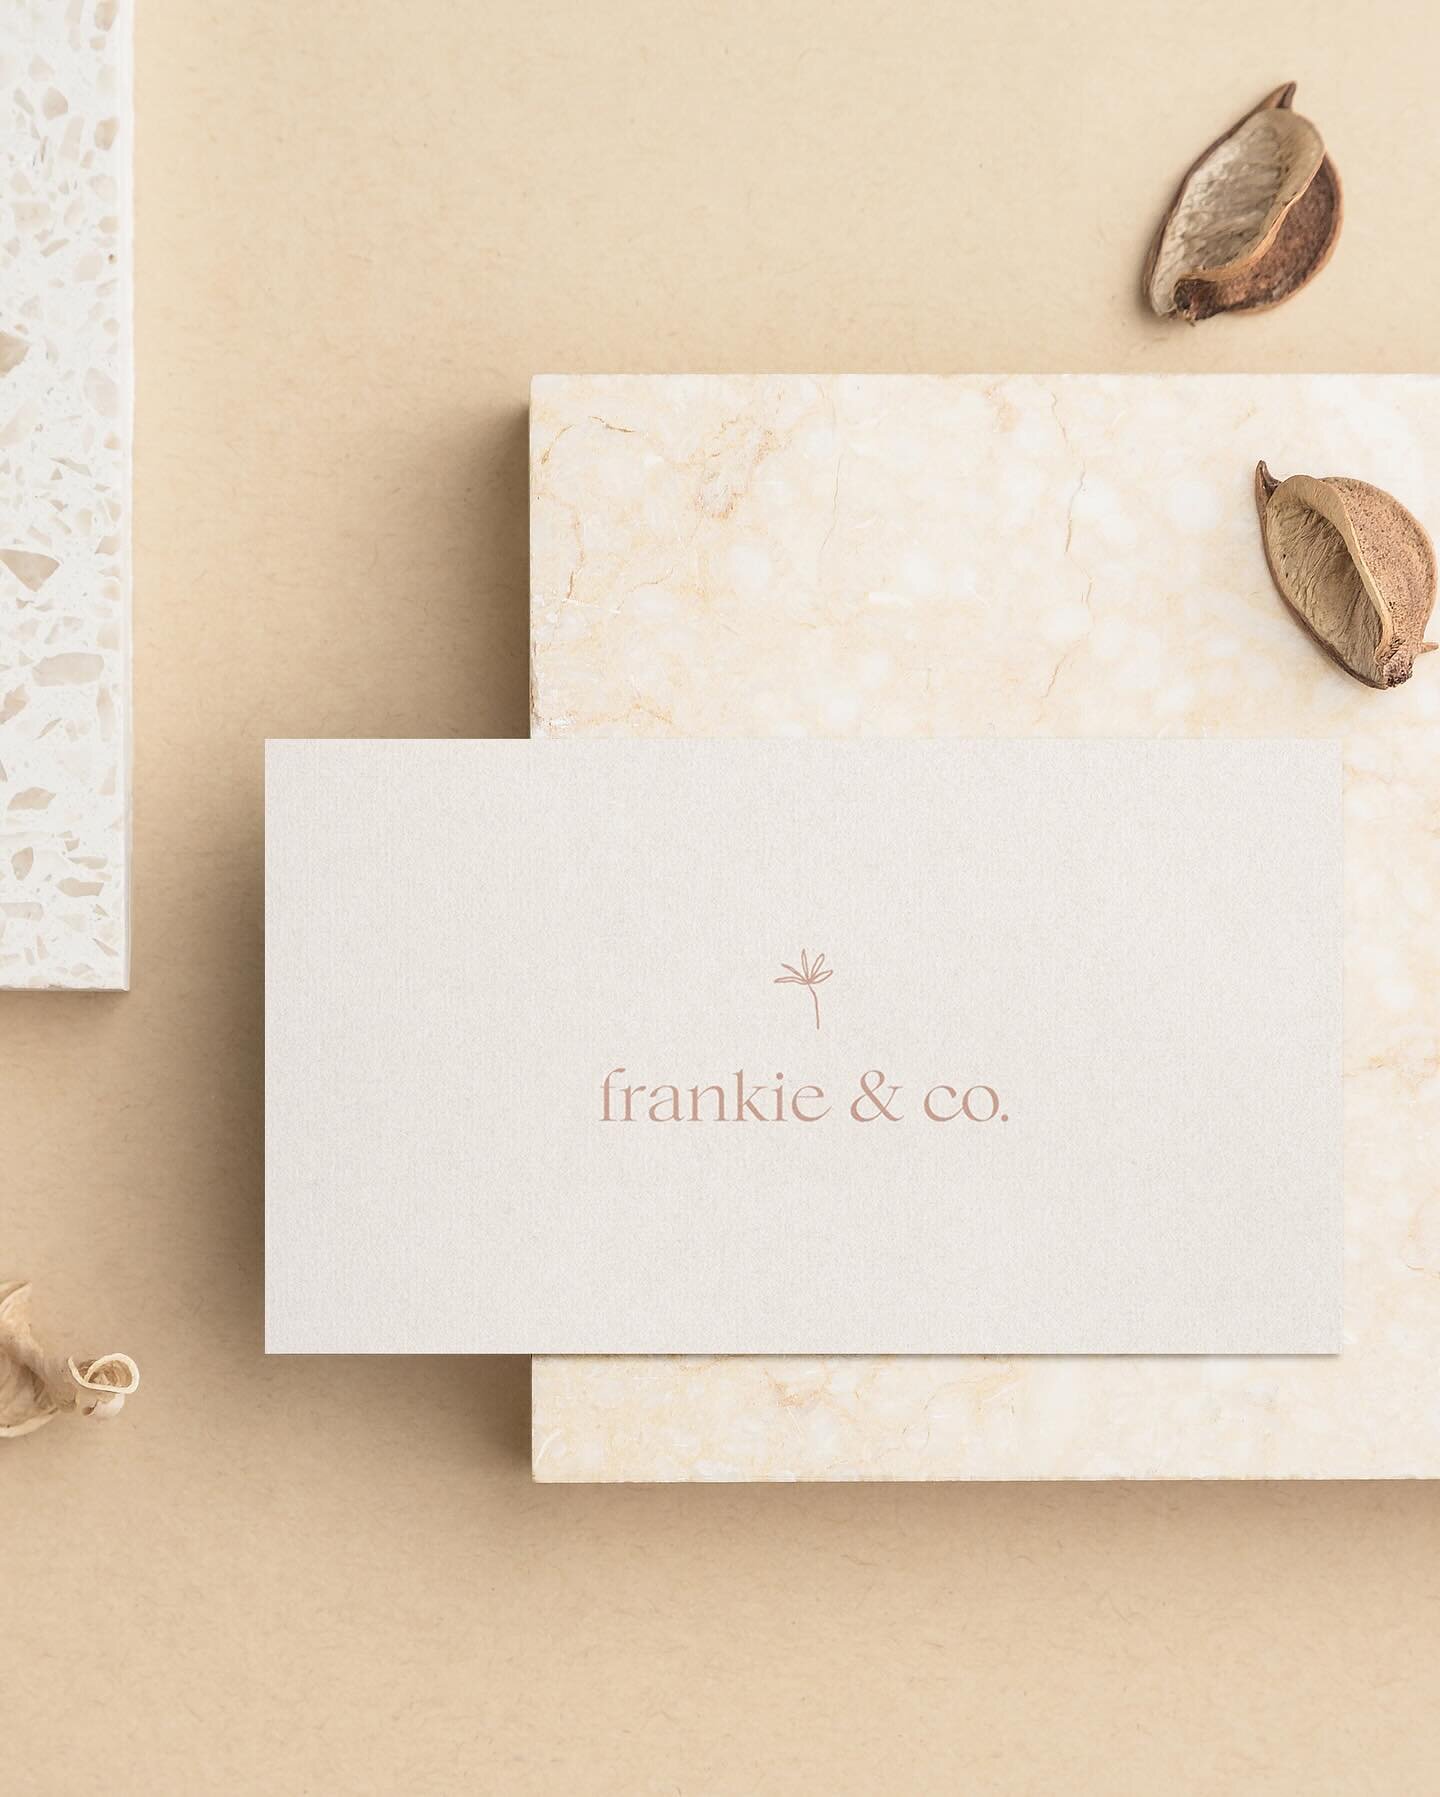 This week&rsquo;s featured brand kit: Frankie &ndash; Playful, organic, earthy, boho

With an alternative and happy vibe, the Frankie brand is dedicated to kind-hearted business owners who value simplicity, slow living and a dash of adventure. 

Perf